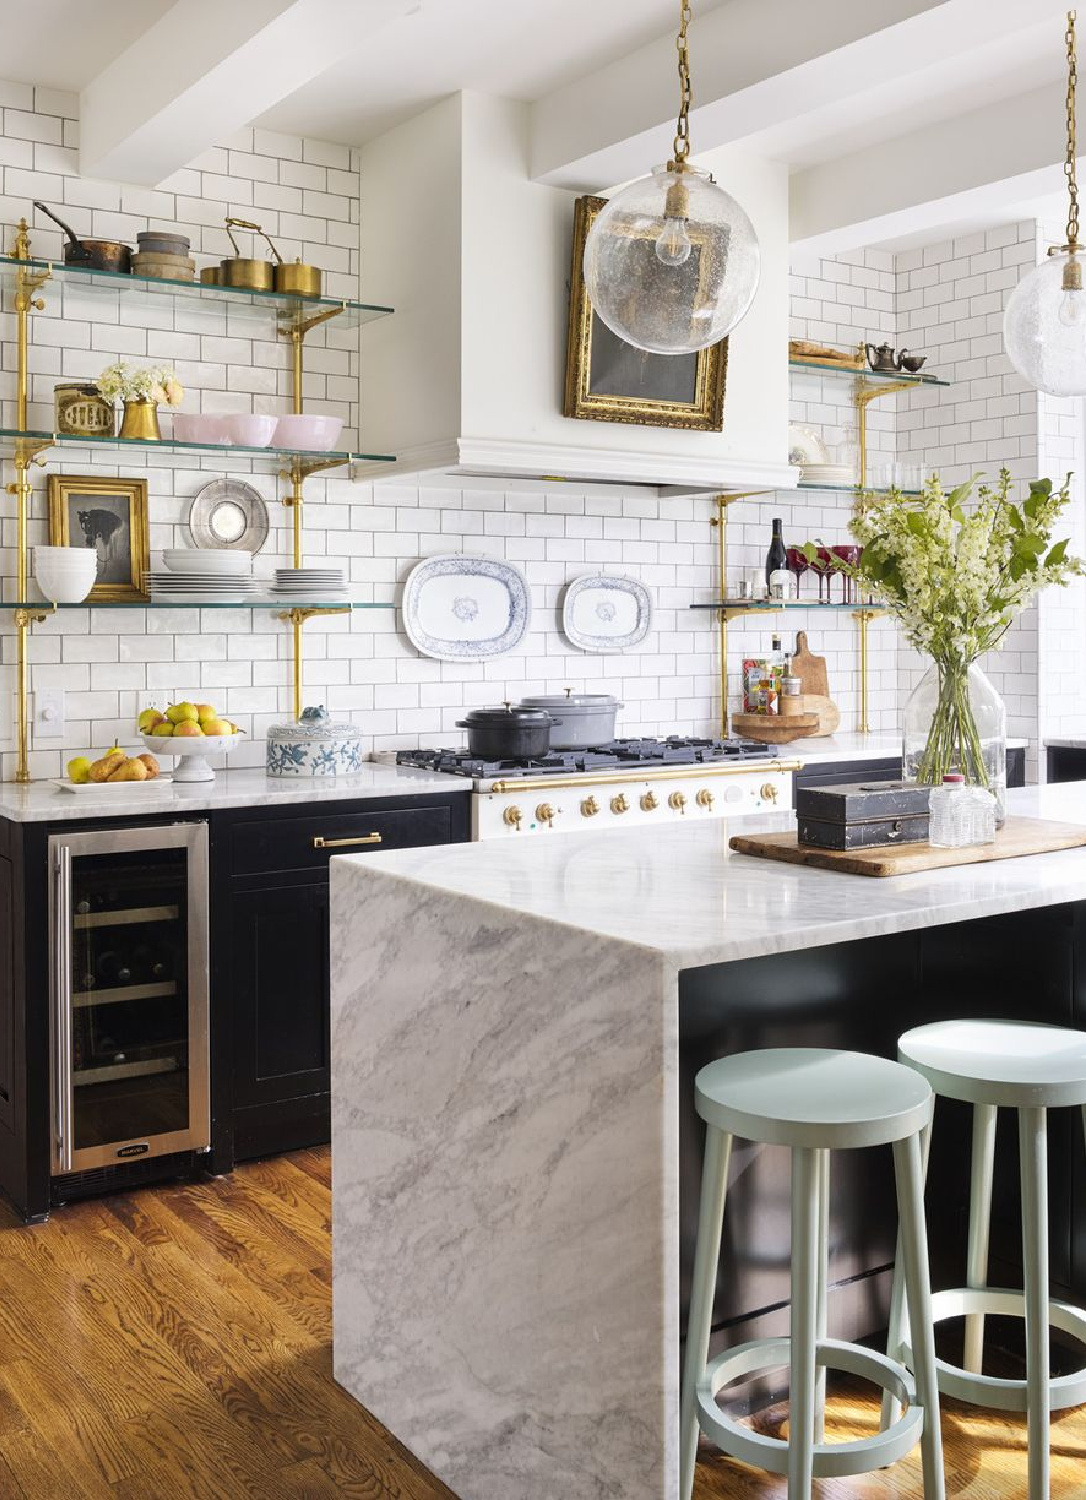 French bistro style white kitchen with open shelving and waterfall island - photo by Annie Schlechter.